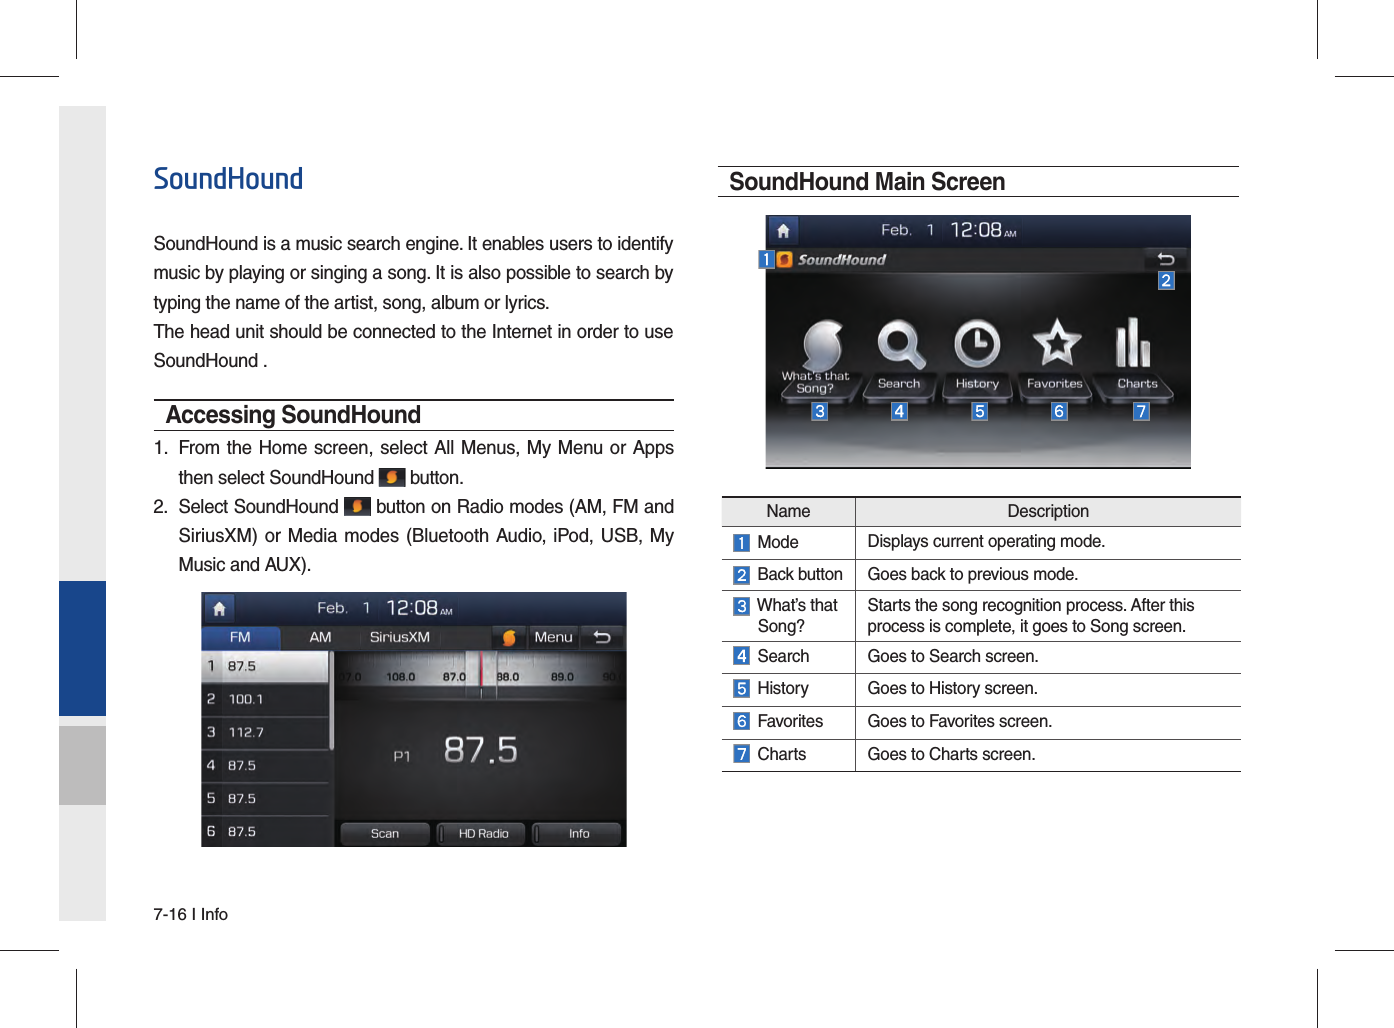 7-16 I InfoSoundHoundSoundHound is a music search engine. It enables users to identify music by playing or singing a song. It is also possible to search by typing the name of the artist, song, album or lyrics.The head unit should be connected to the Internet in order to use SoundHound .Accessing SoundHound 1.  From the Home screen, select All Menus, My Menu or Appsthen select SoundHound  button.2.  Select SoundHound  button on Radio modes (AM, FM and SiriusXM) or Media modes (Bluetooth Audio, iPod, USB, My Music and AUX). SoundHound Main ScreenName Description Mode Displays current operating mode.  Back button Goes back to previous mode.  What’s that  Song? Starts the song recognition process. After this process is complete, it goes to Song screen.  Search Goes to Search screen. History Goes to History screen.  Favorites Goes to Favorites screen. Charts Goes to Charts screen.